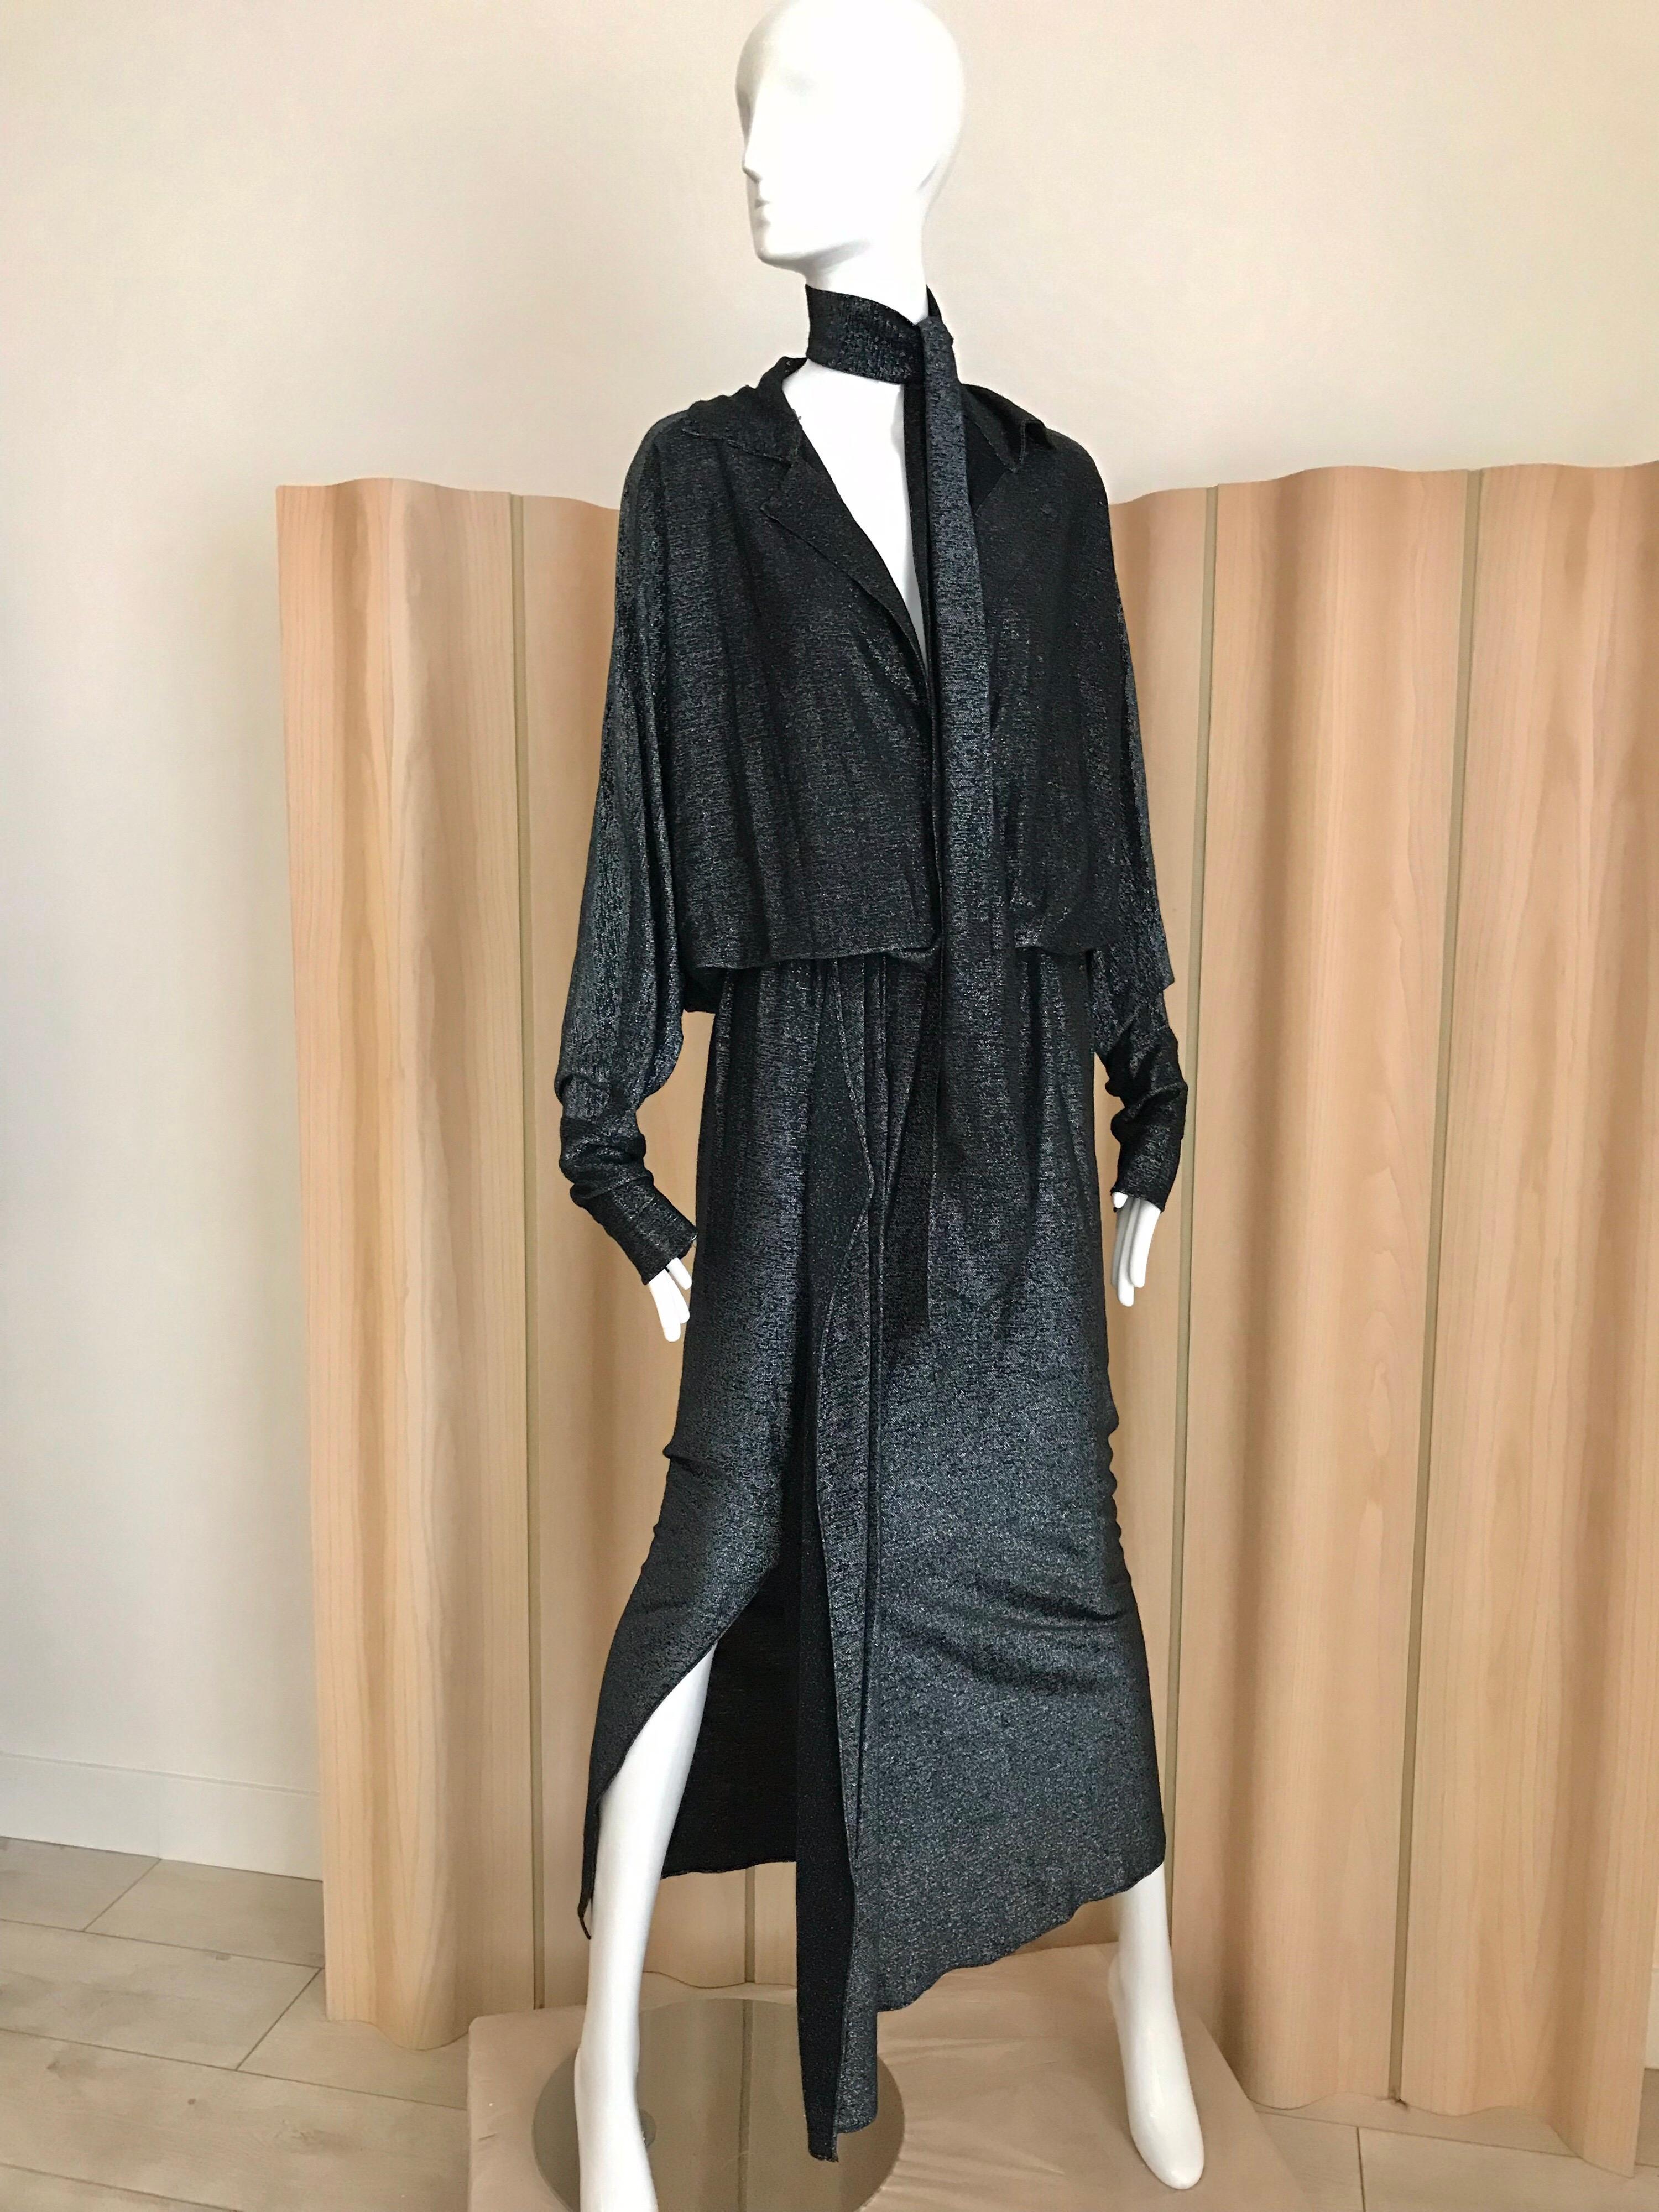 Vintage 1970s Giorgio Di Sant Angelo Black Soft jersey dress with metallic sheen. Batwing sleeves and with elastic waist. Dress can be worn V neck or high neck.  Perfect for Studio 54 party.
Size: 4-6-8